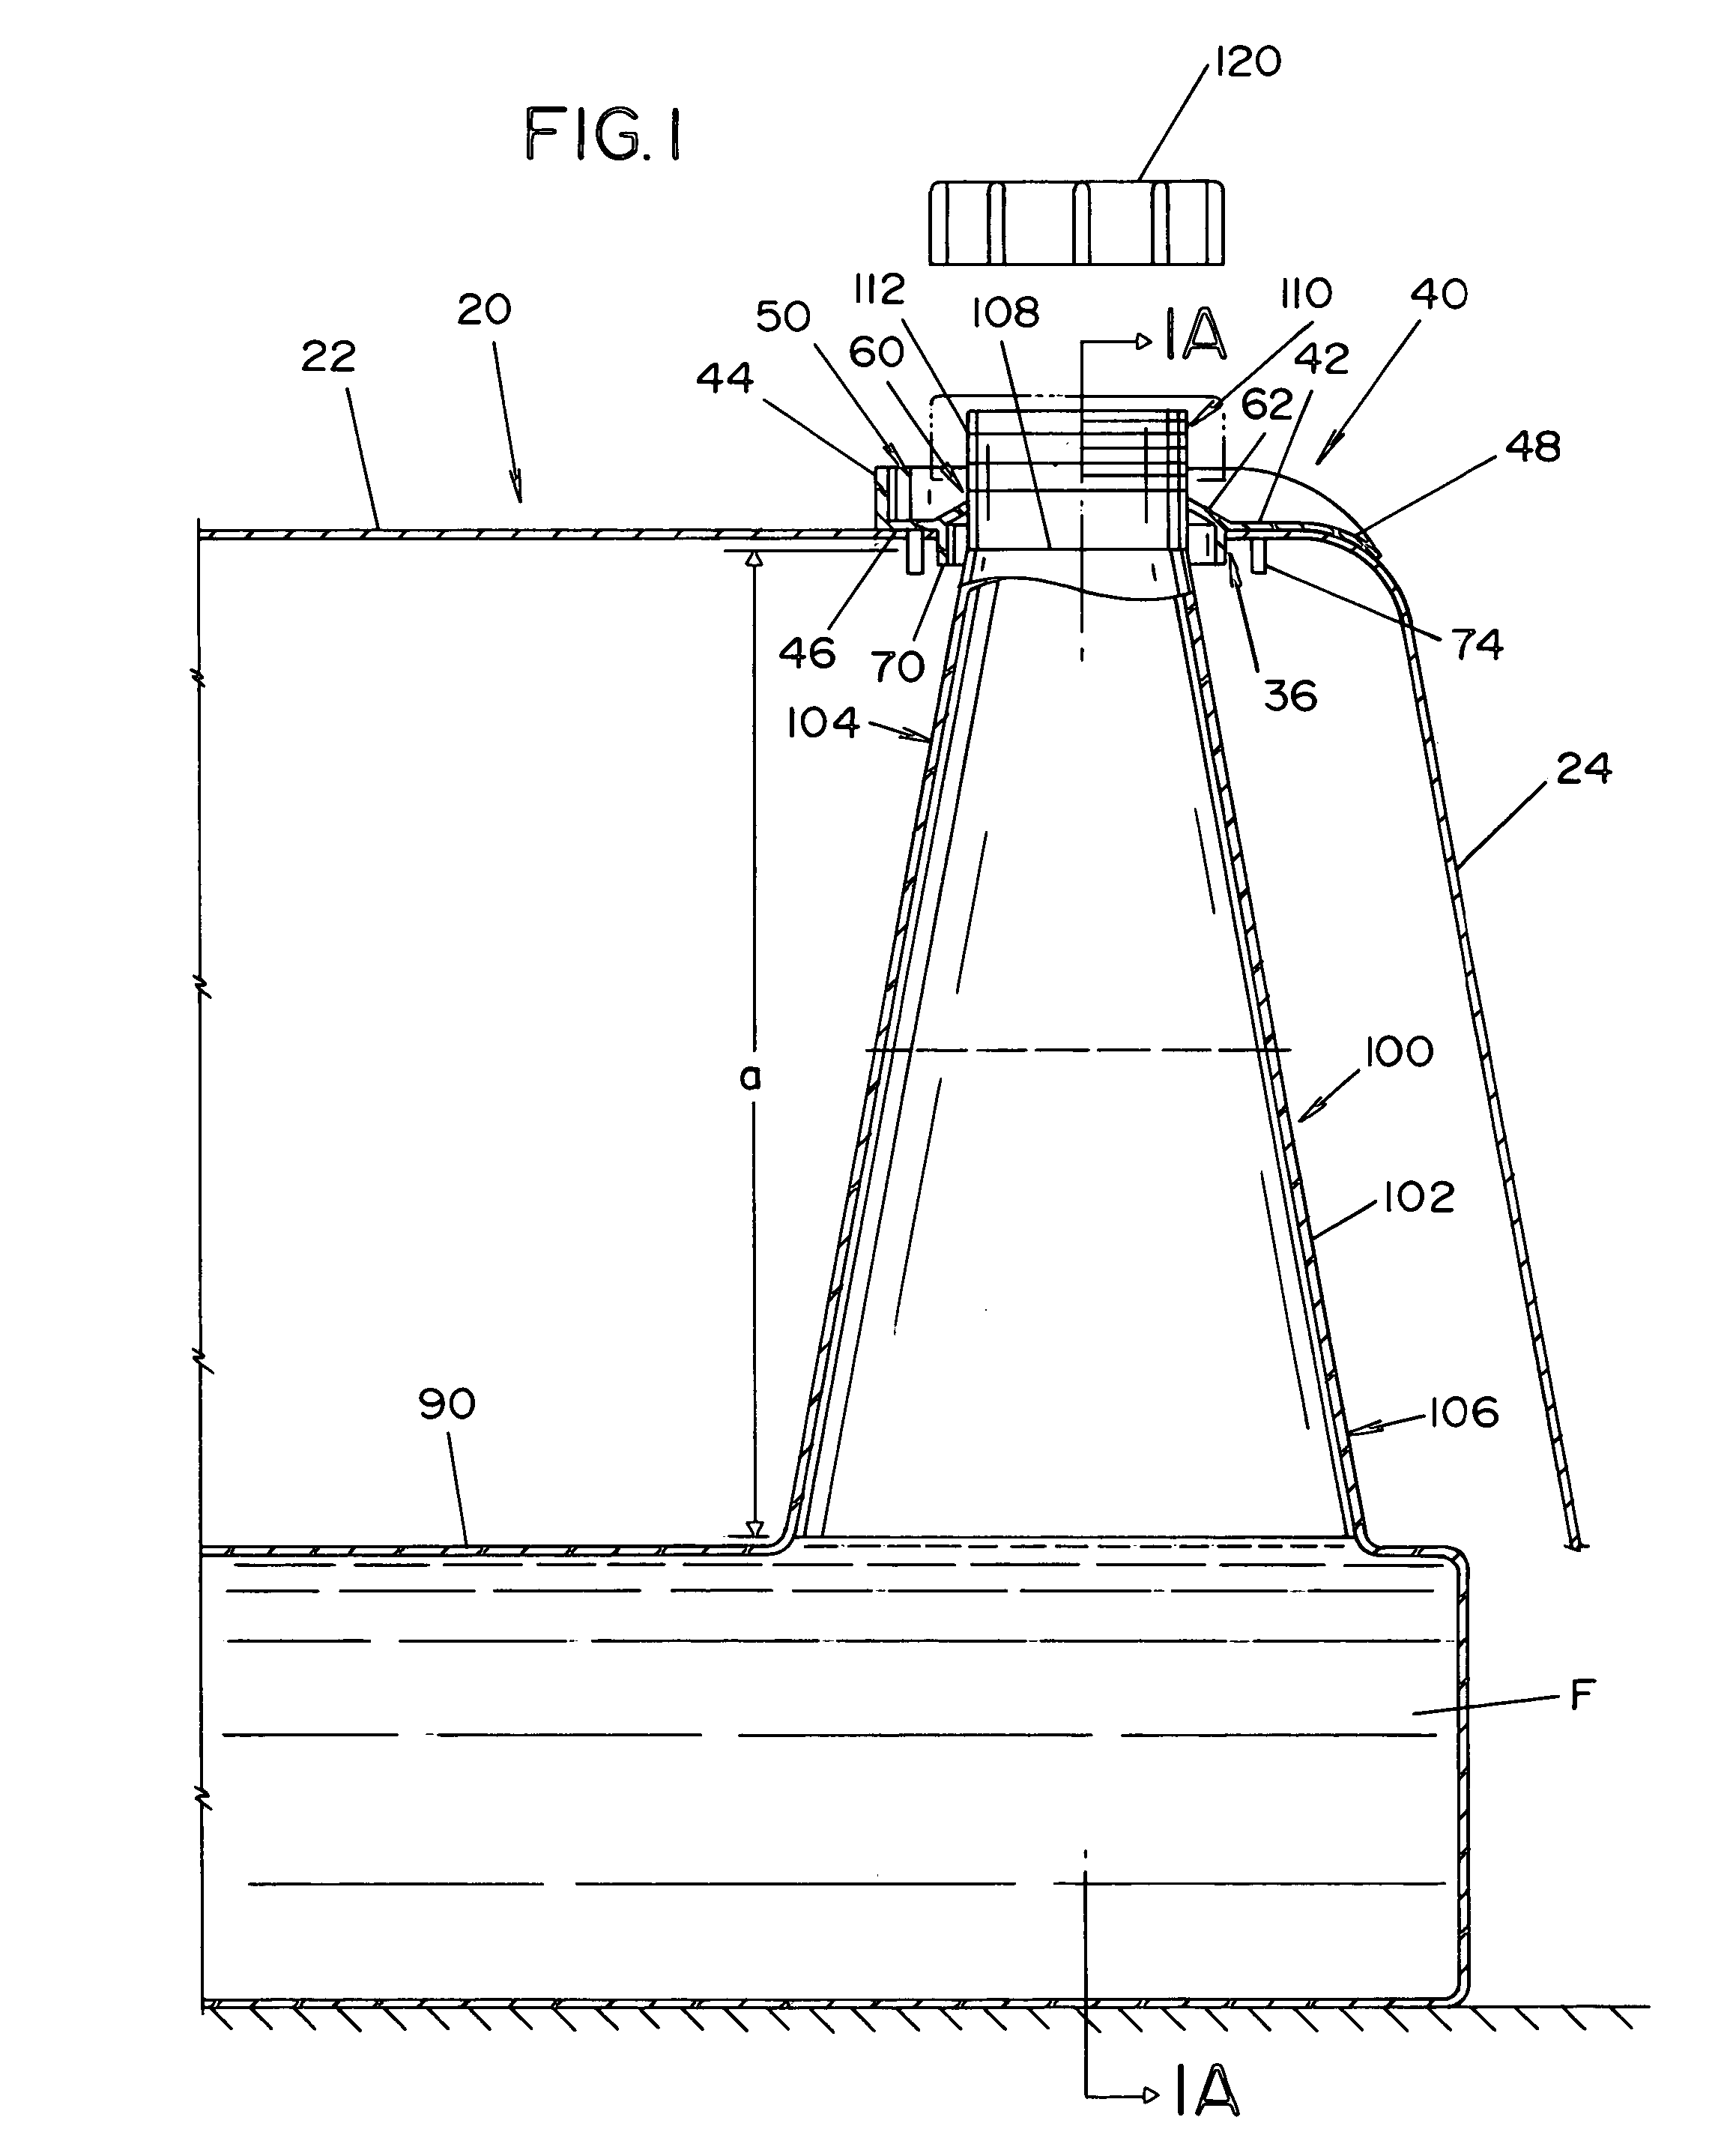 Visual fuel system for an engine welder